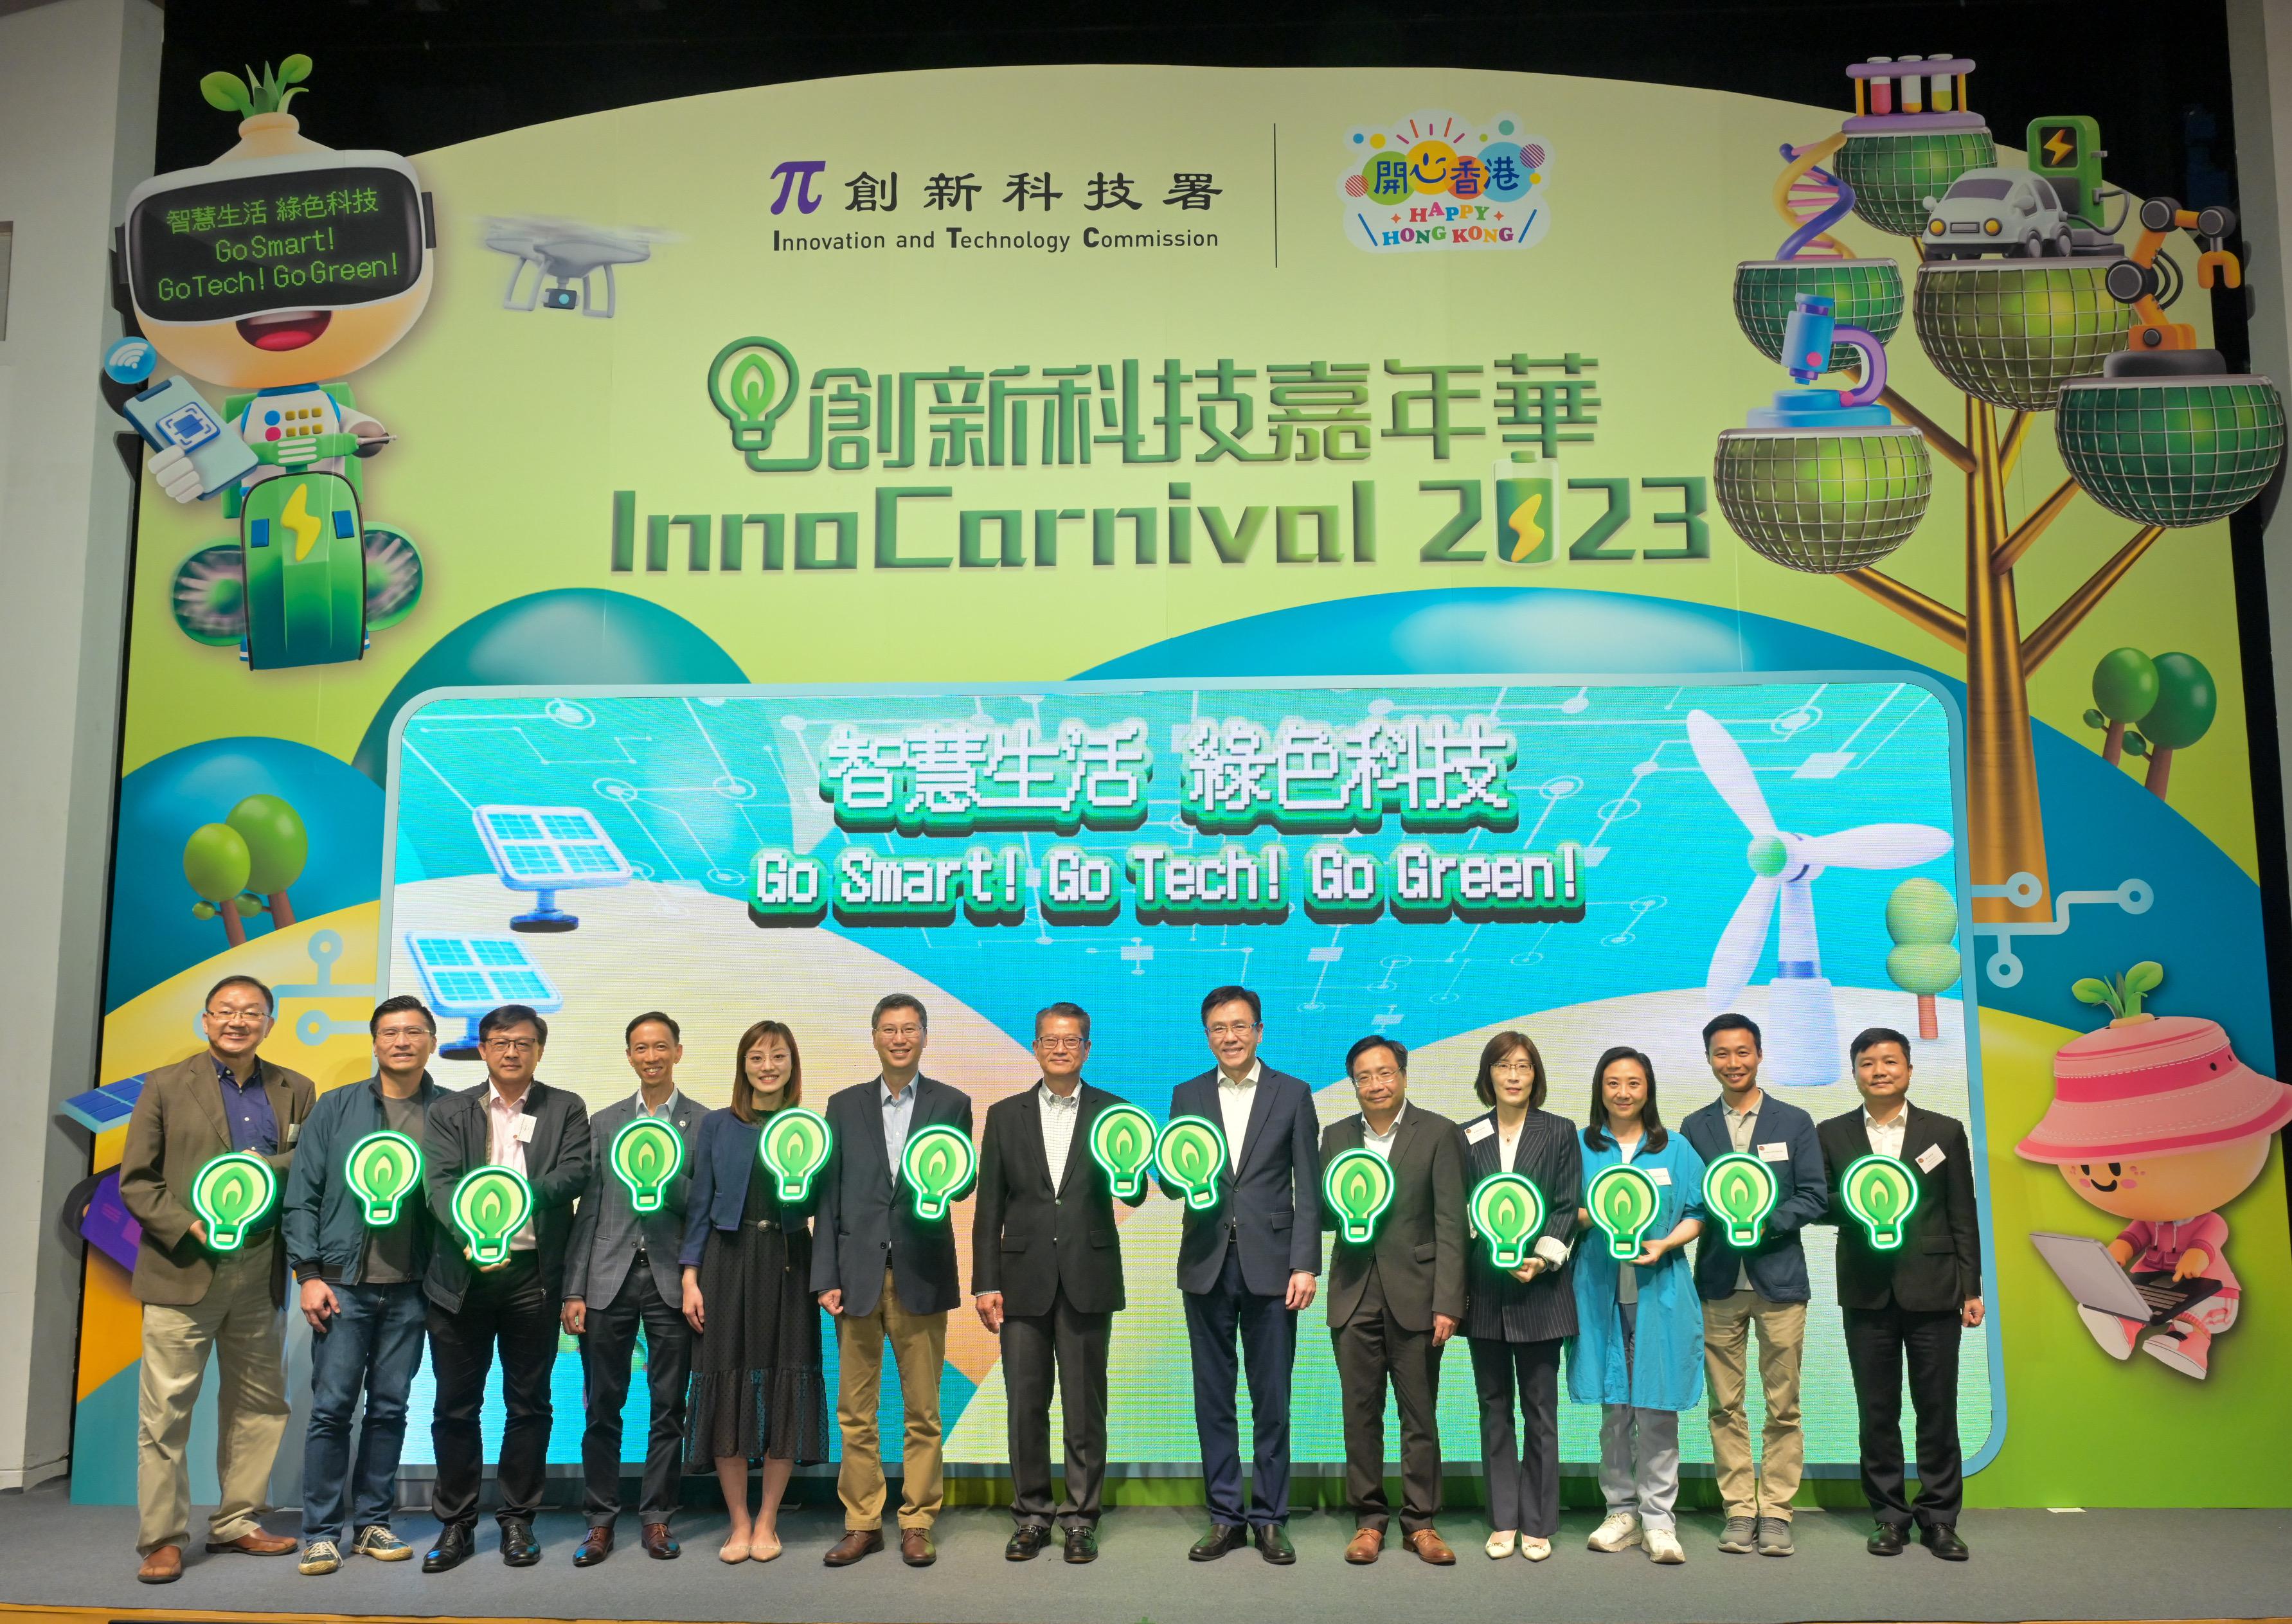 The Financial Secretary, Mr Paul Chan, attended the opening ceremony of InnoCarnival 2023 today (October 28). Photo shows (from fourth left) the Chief Financial Officer of the Hong Kong Science and Technology Parks Corporation, Mr Aldous Mak; the Under Secretary for Innovation, Technology and Industry, Ms Lillian Cheong; the Permanent Secretary for Innovation, Technology and Industry, Mr Eddie Mak; Mr Chan; the Secretary for Innovation, Technology and Industry, Professor Sun Dong; the Commissioner for Innovation and Technology, Mr Ivan Lee; the Executive Director of the Hong Kong Federation of Youth Groups, Ms Helen Hsu, and other guests officiating at the ceremony.